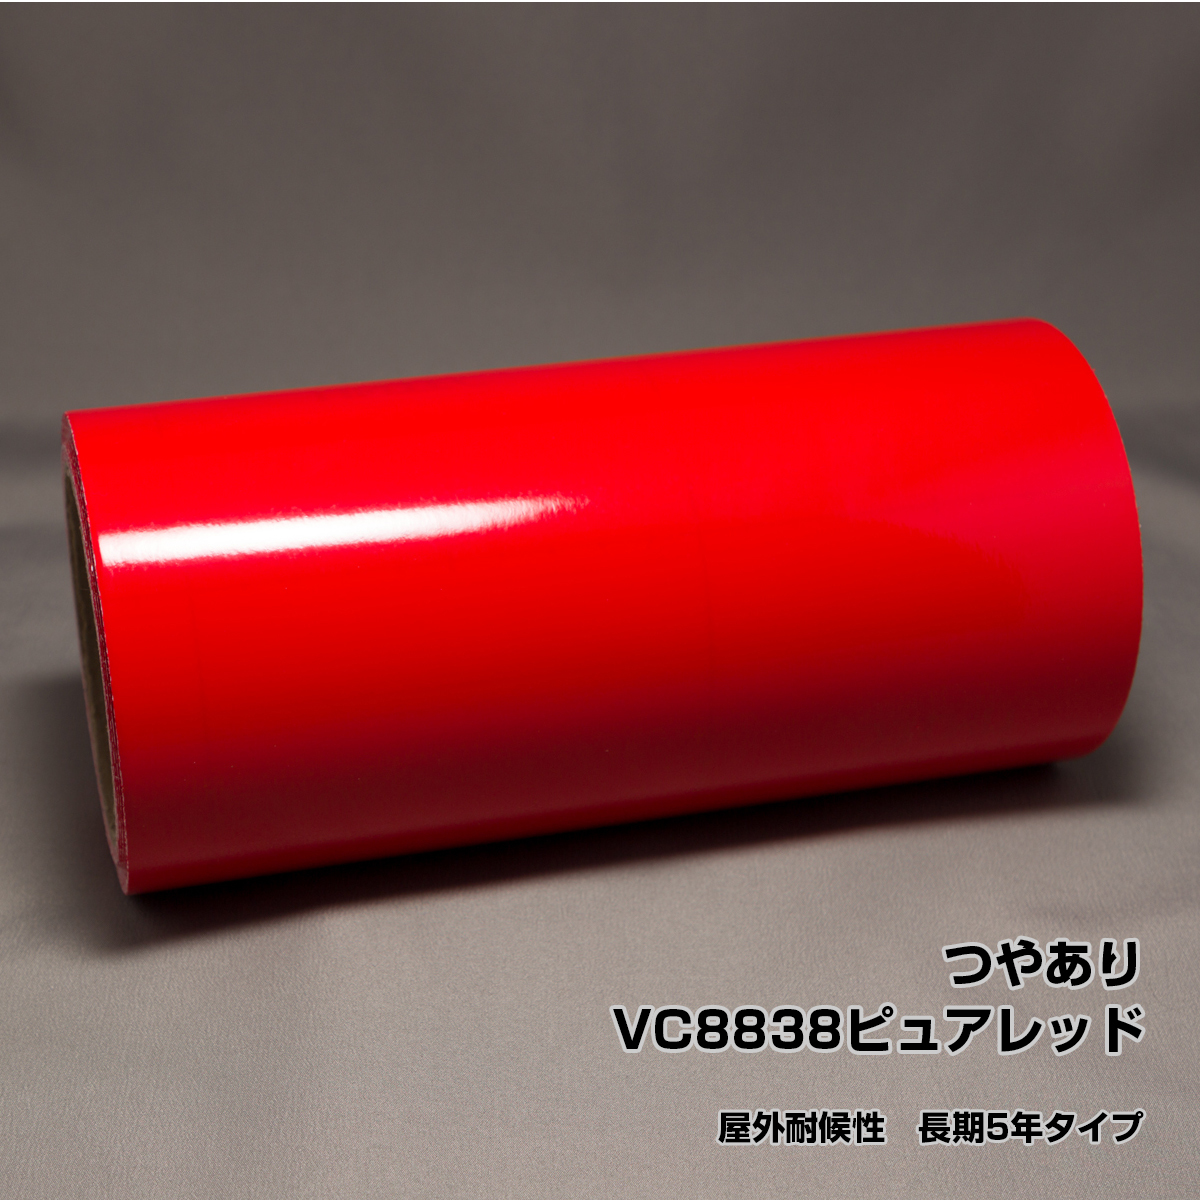 37cm×10m VC8838 pure red outdoors weather resistant long time period 5 year type marking seat cutting film stereo kaSX-15 SV-15 craft Robot Pro 